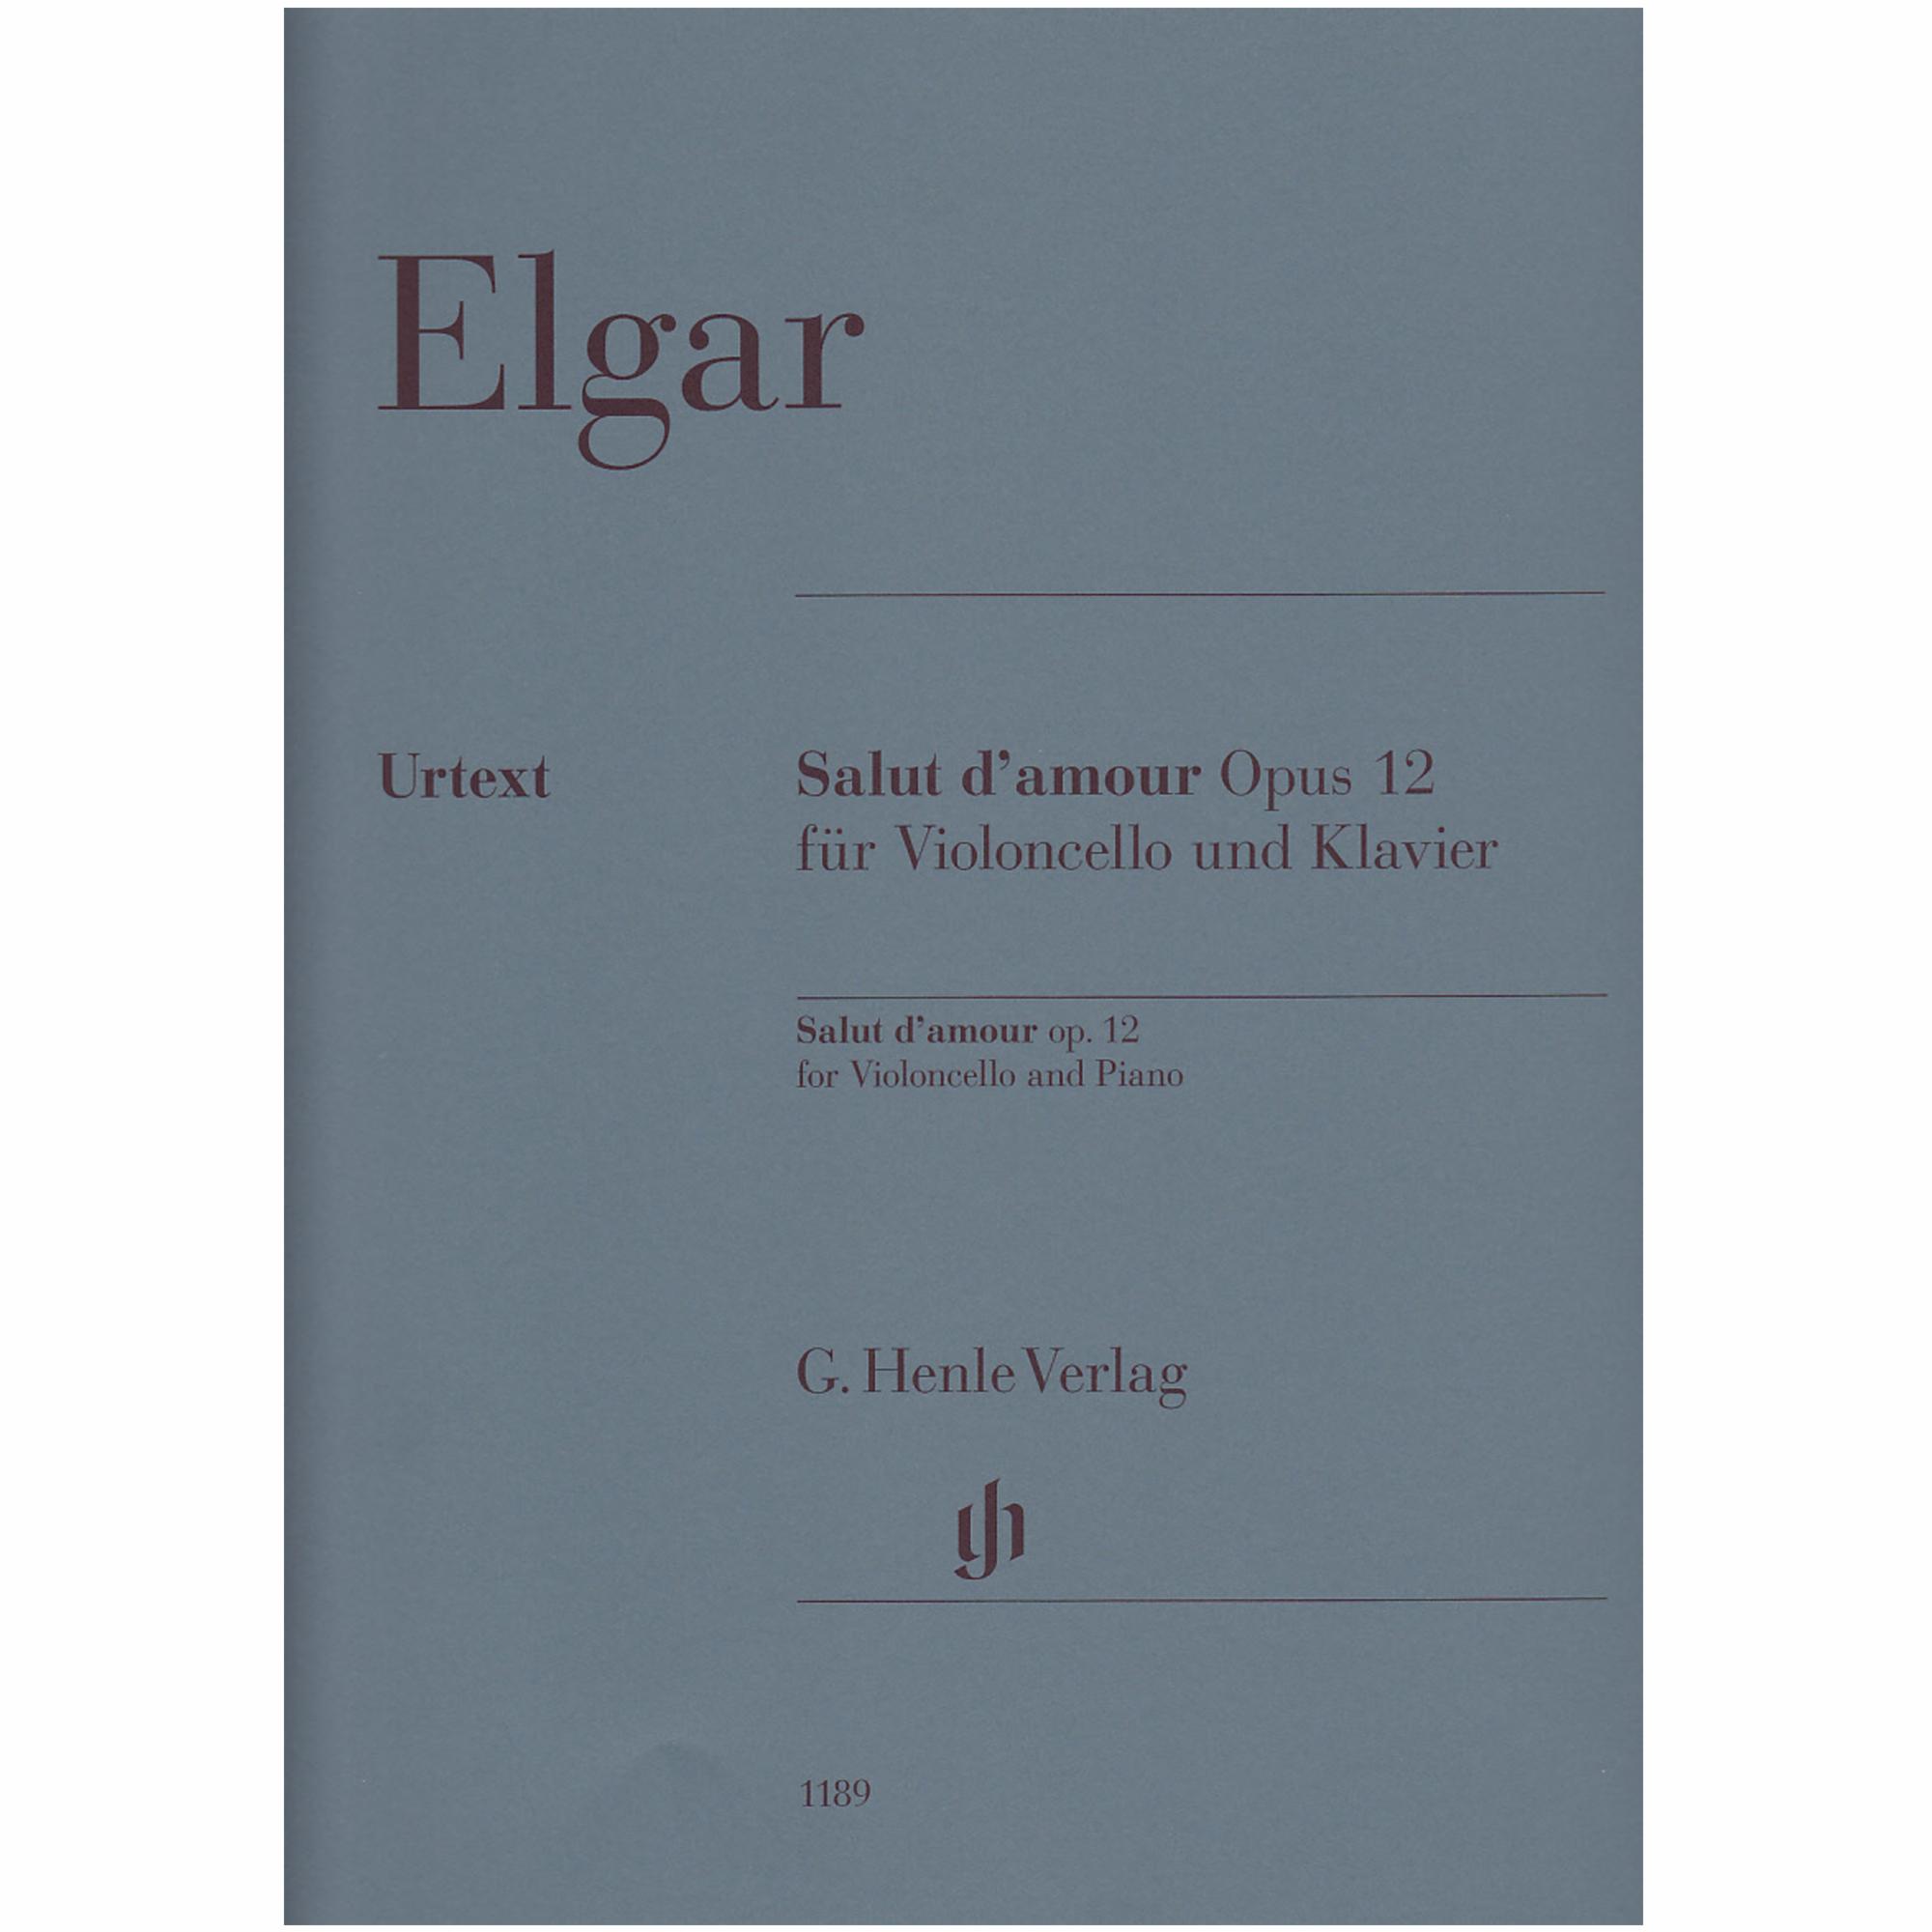 Salut d'amour for Cello and Piano, Op. 12